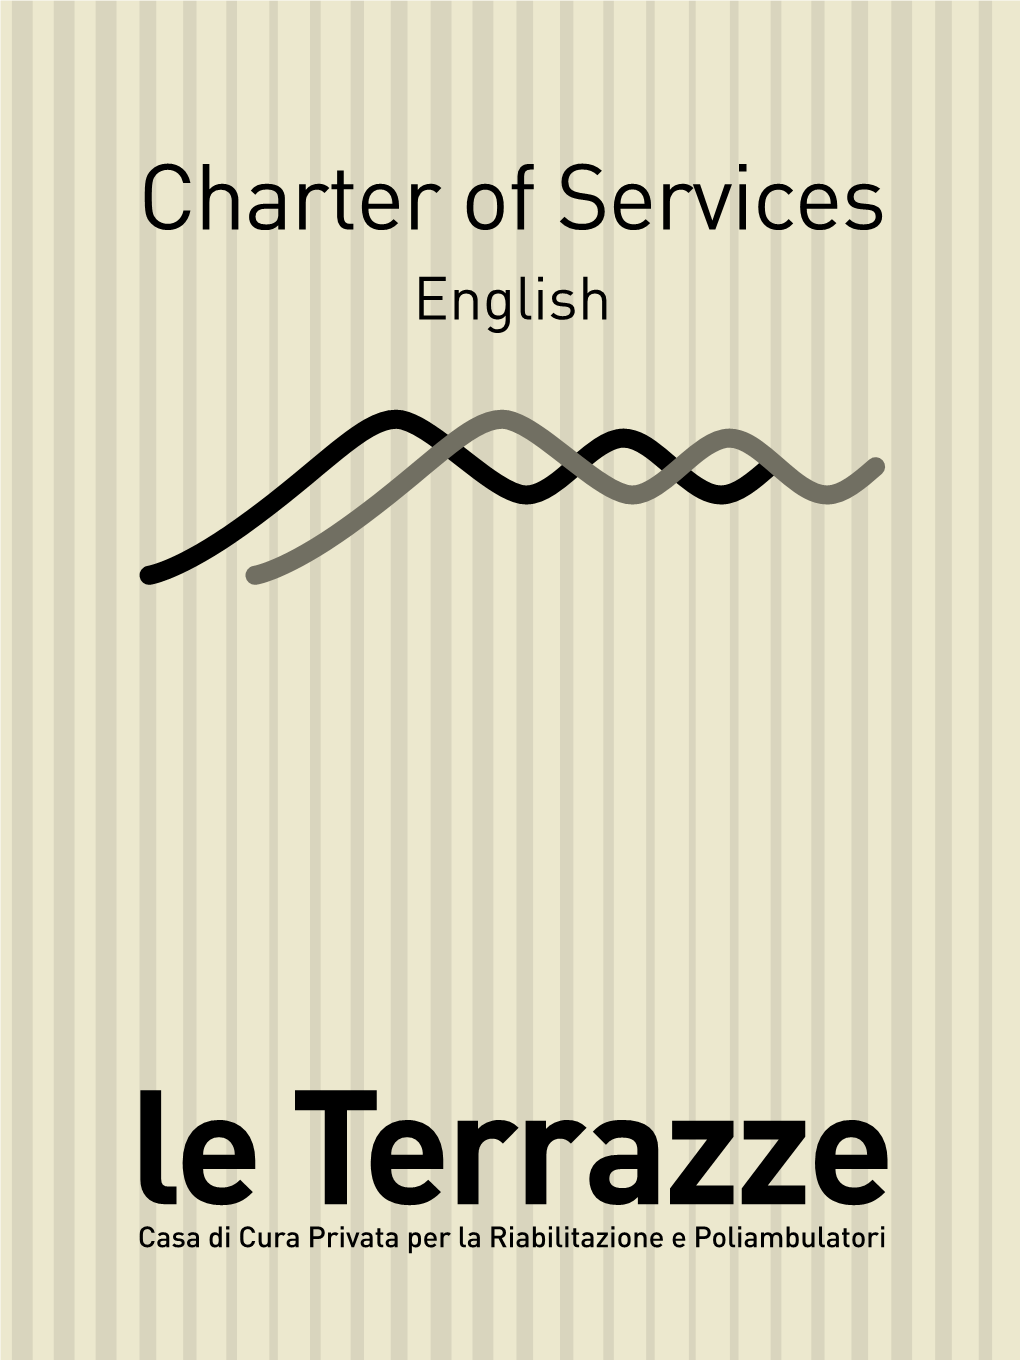 Charter of Services English